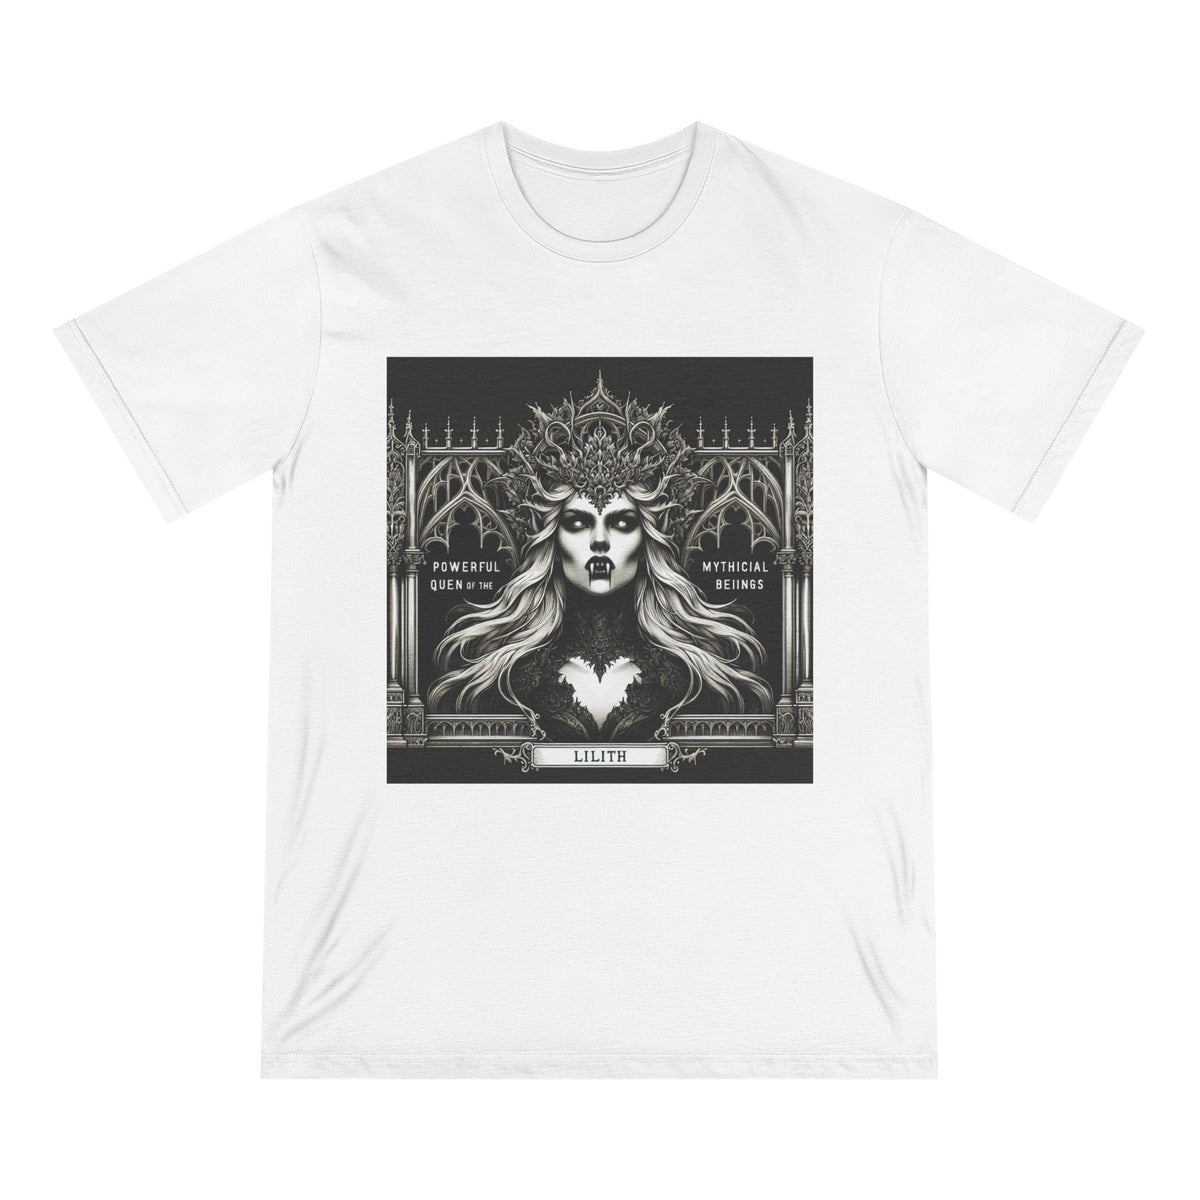 ’Mystique of Lilith - Exclusive T-Shirt’ - White / XS